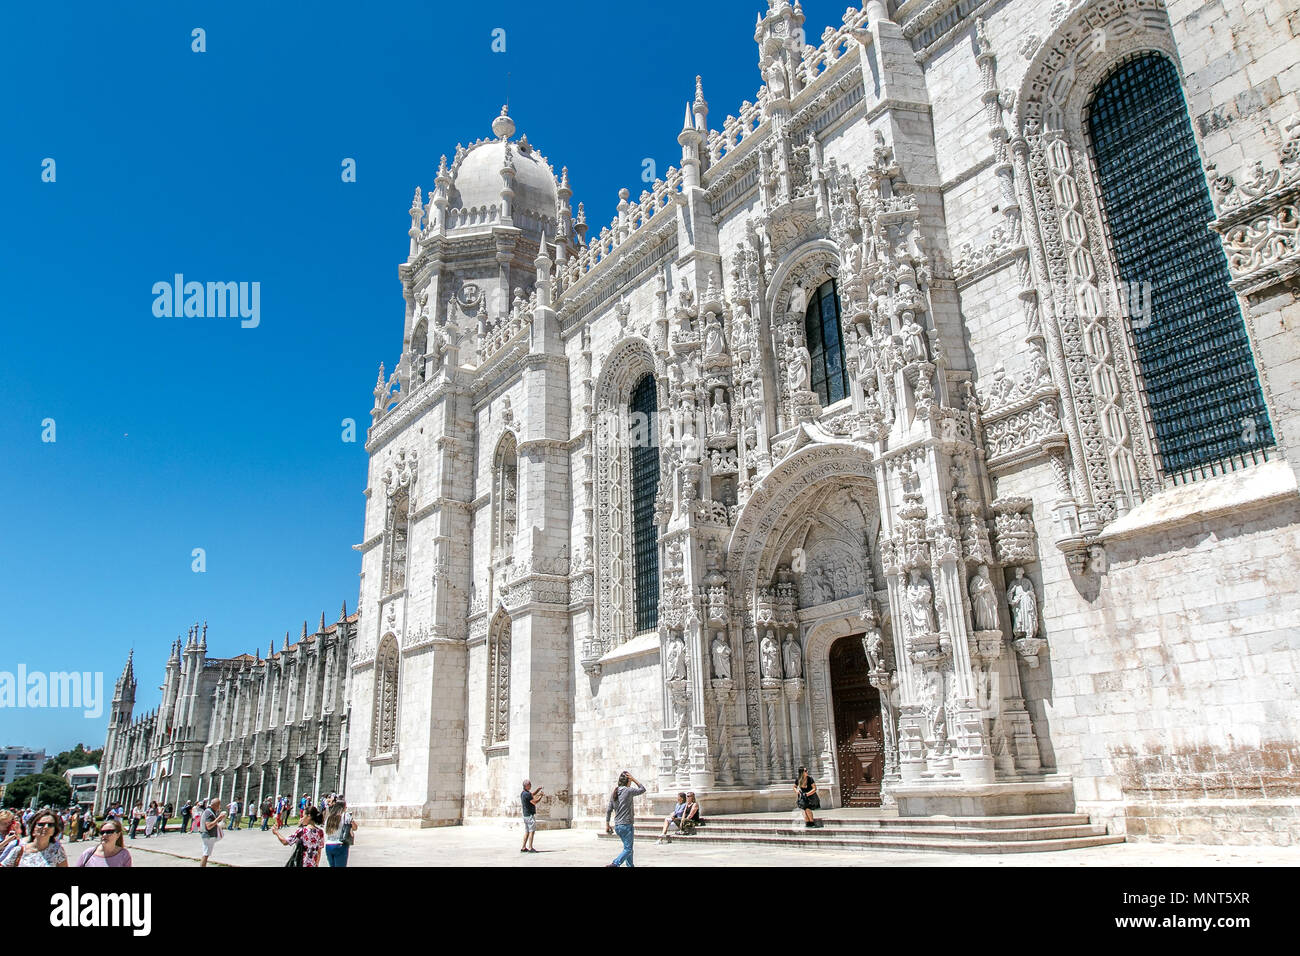 View of the famous Jeronimos Monastery in Belem, Lisbon, Portugal. Stock Photo